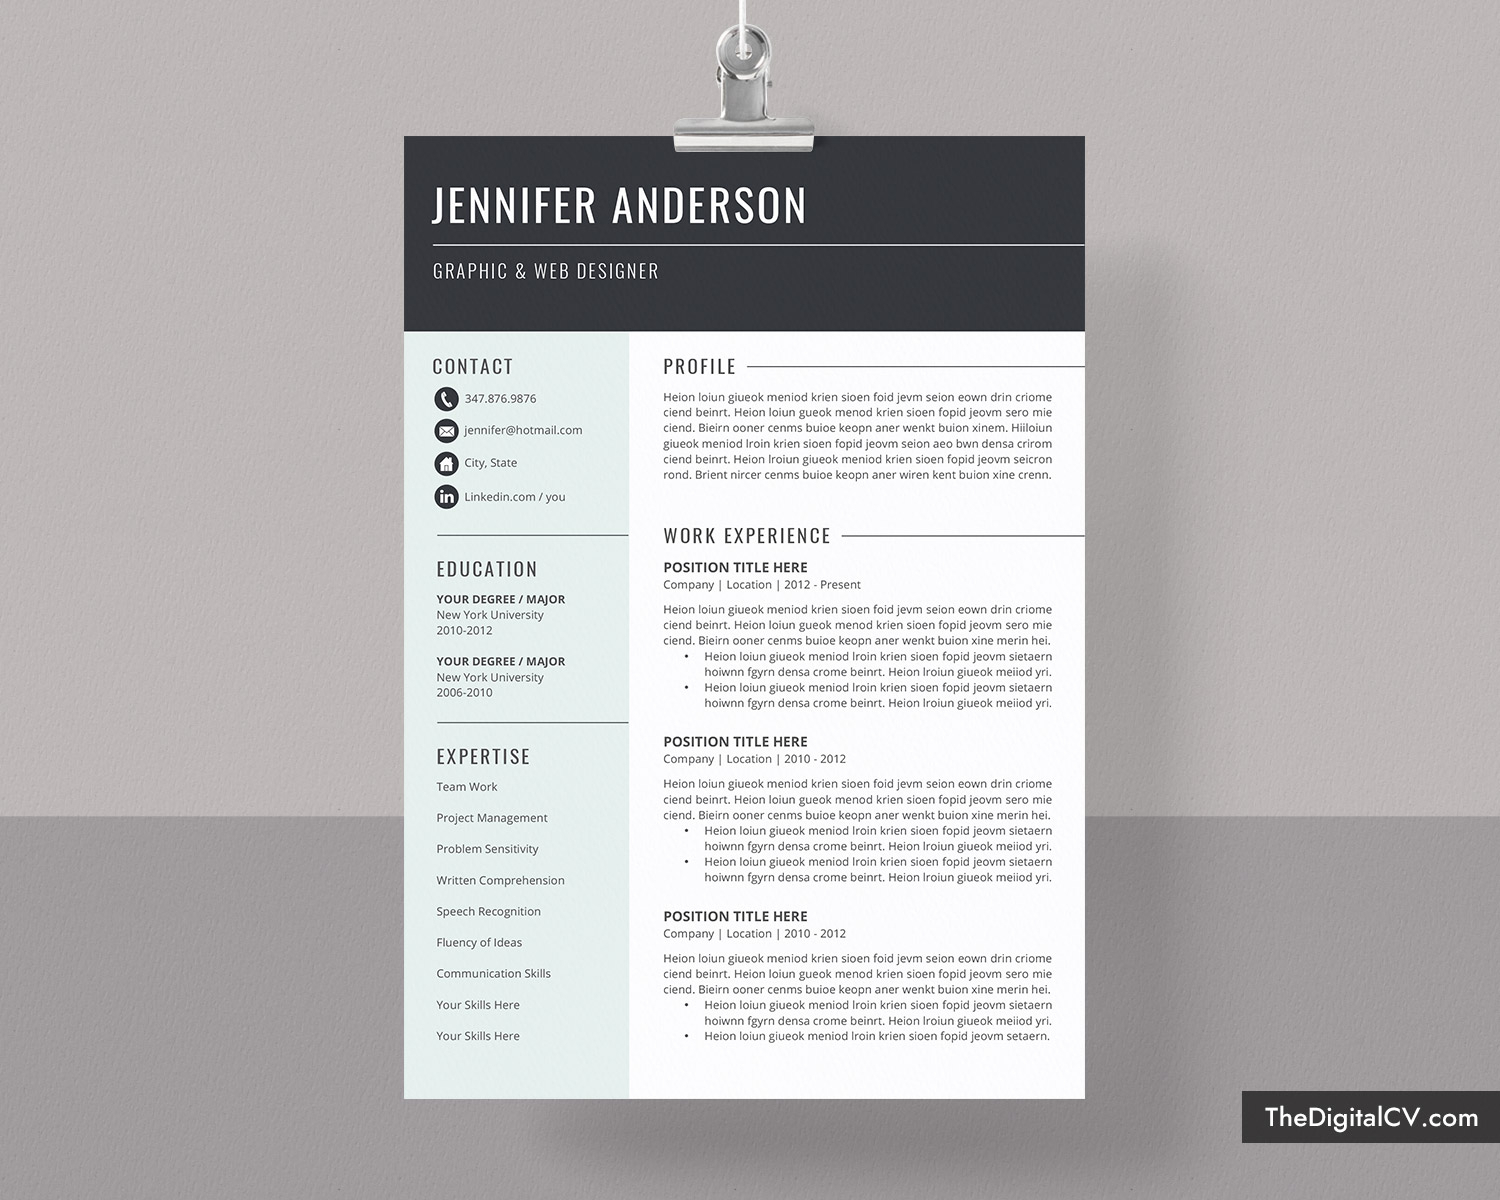 Basic And Simple Resume Template 2020 2021, Cv Template, Cover Letter,  Microsoft Word Resume Template, 1 3 Page, Modern Resume, Creative Resume, Intended For Microsoft Word Resumes Templates